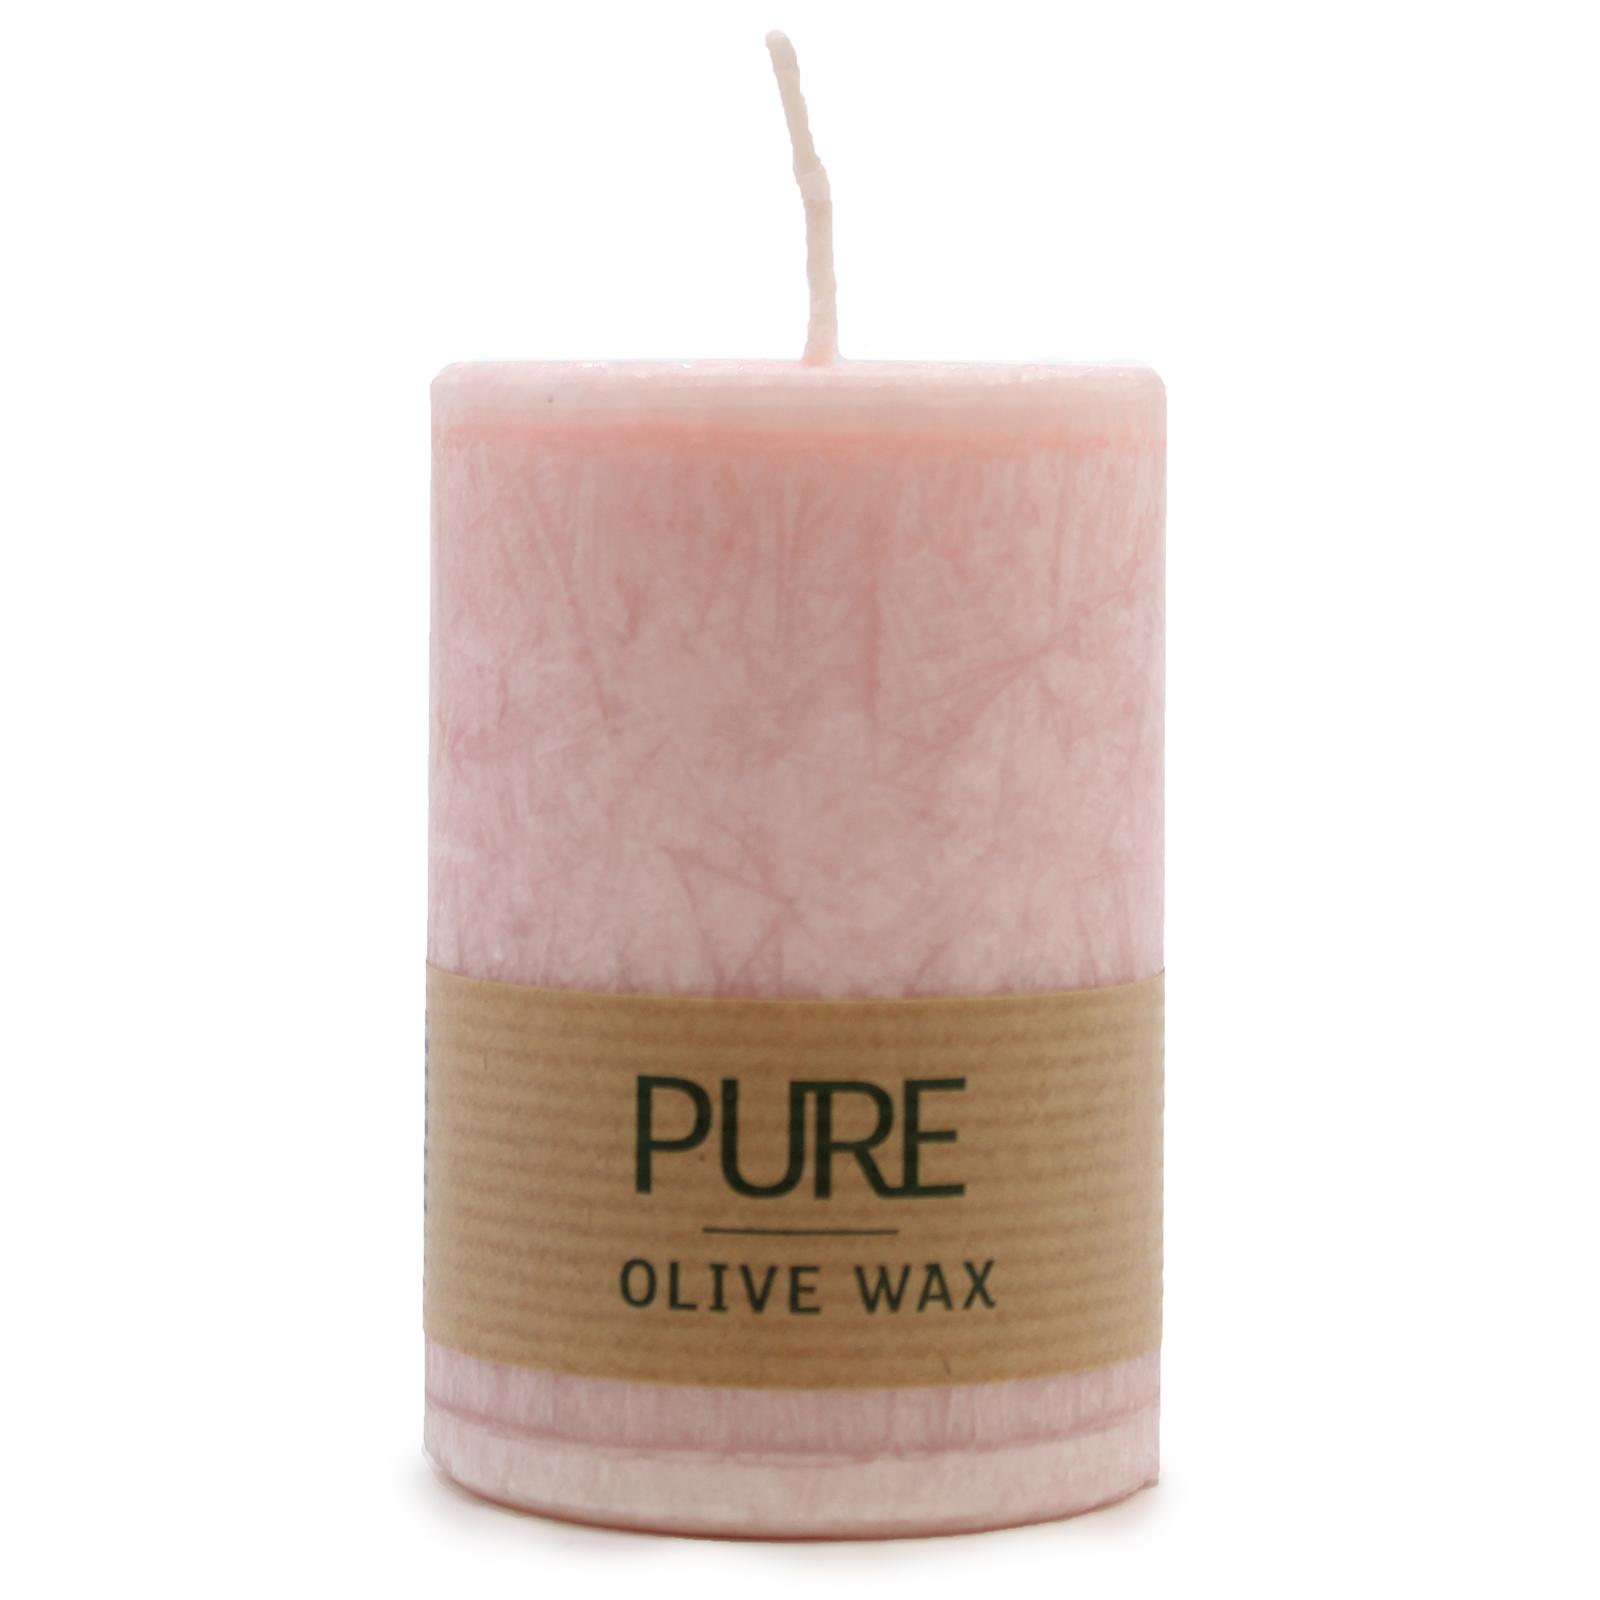 Vegan-Friendly Pure Olive Wax Candle 90x60 - Antique Rose